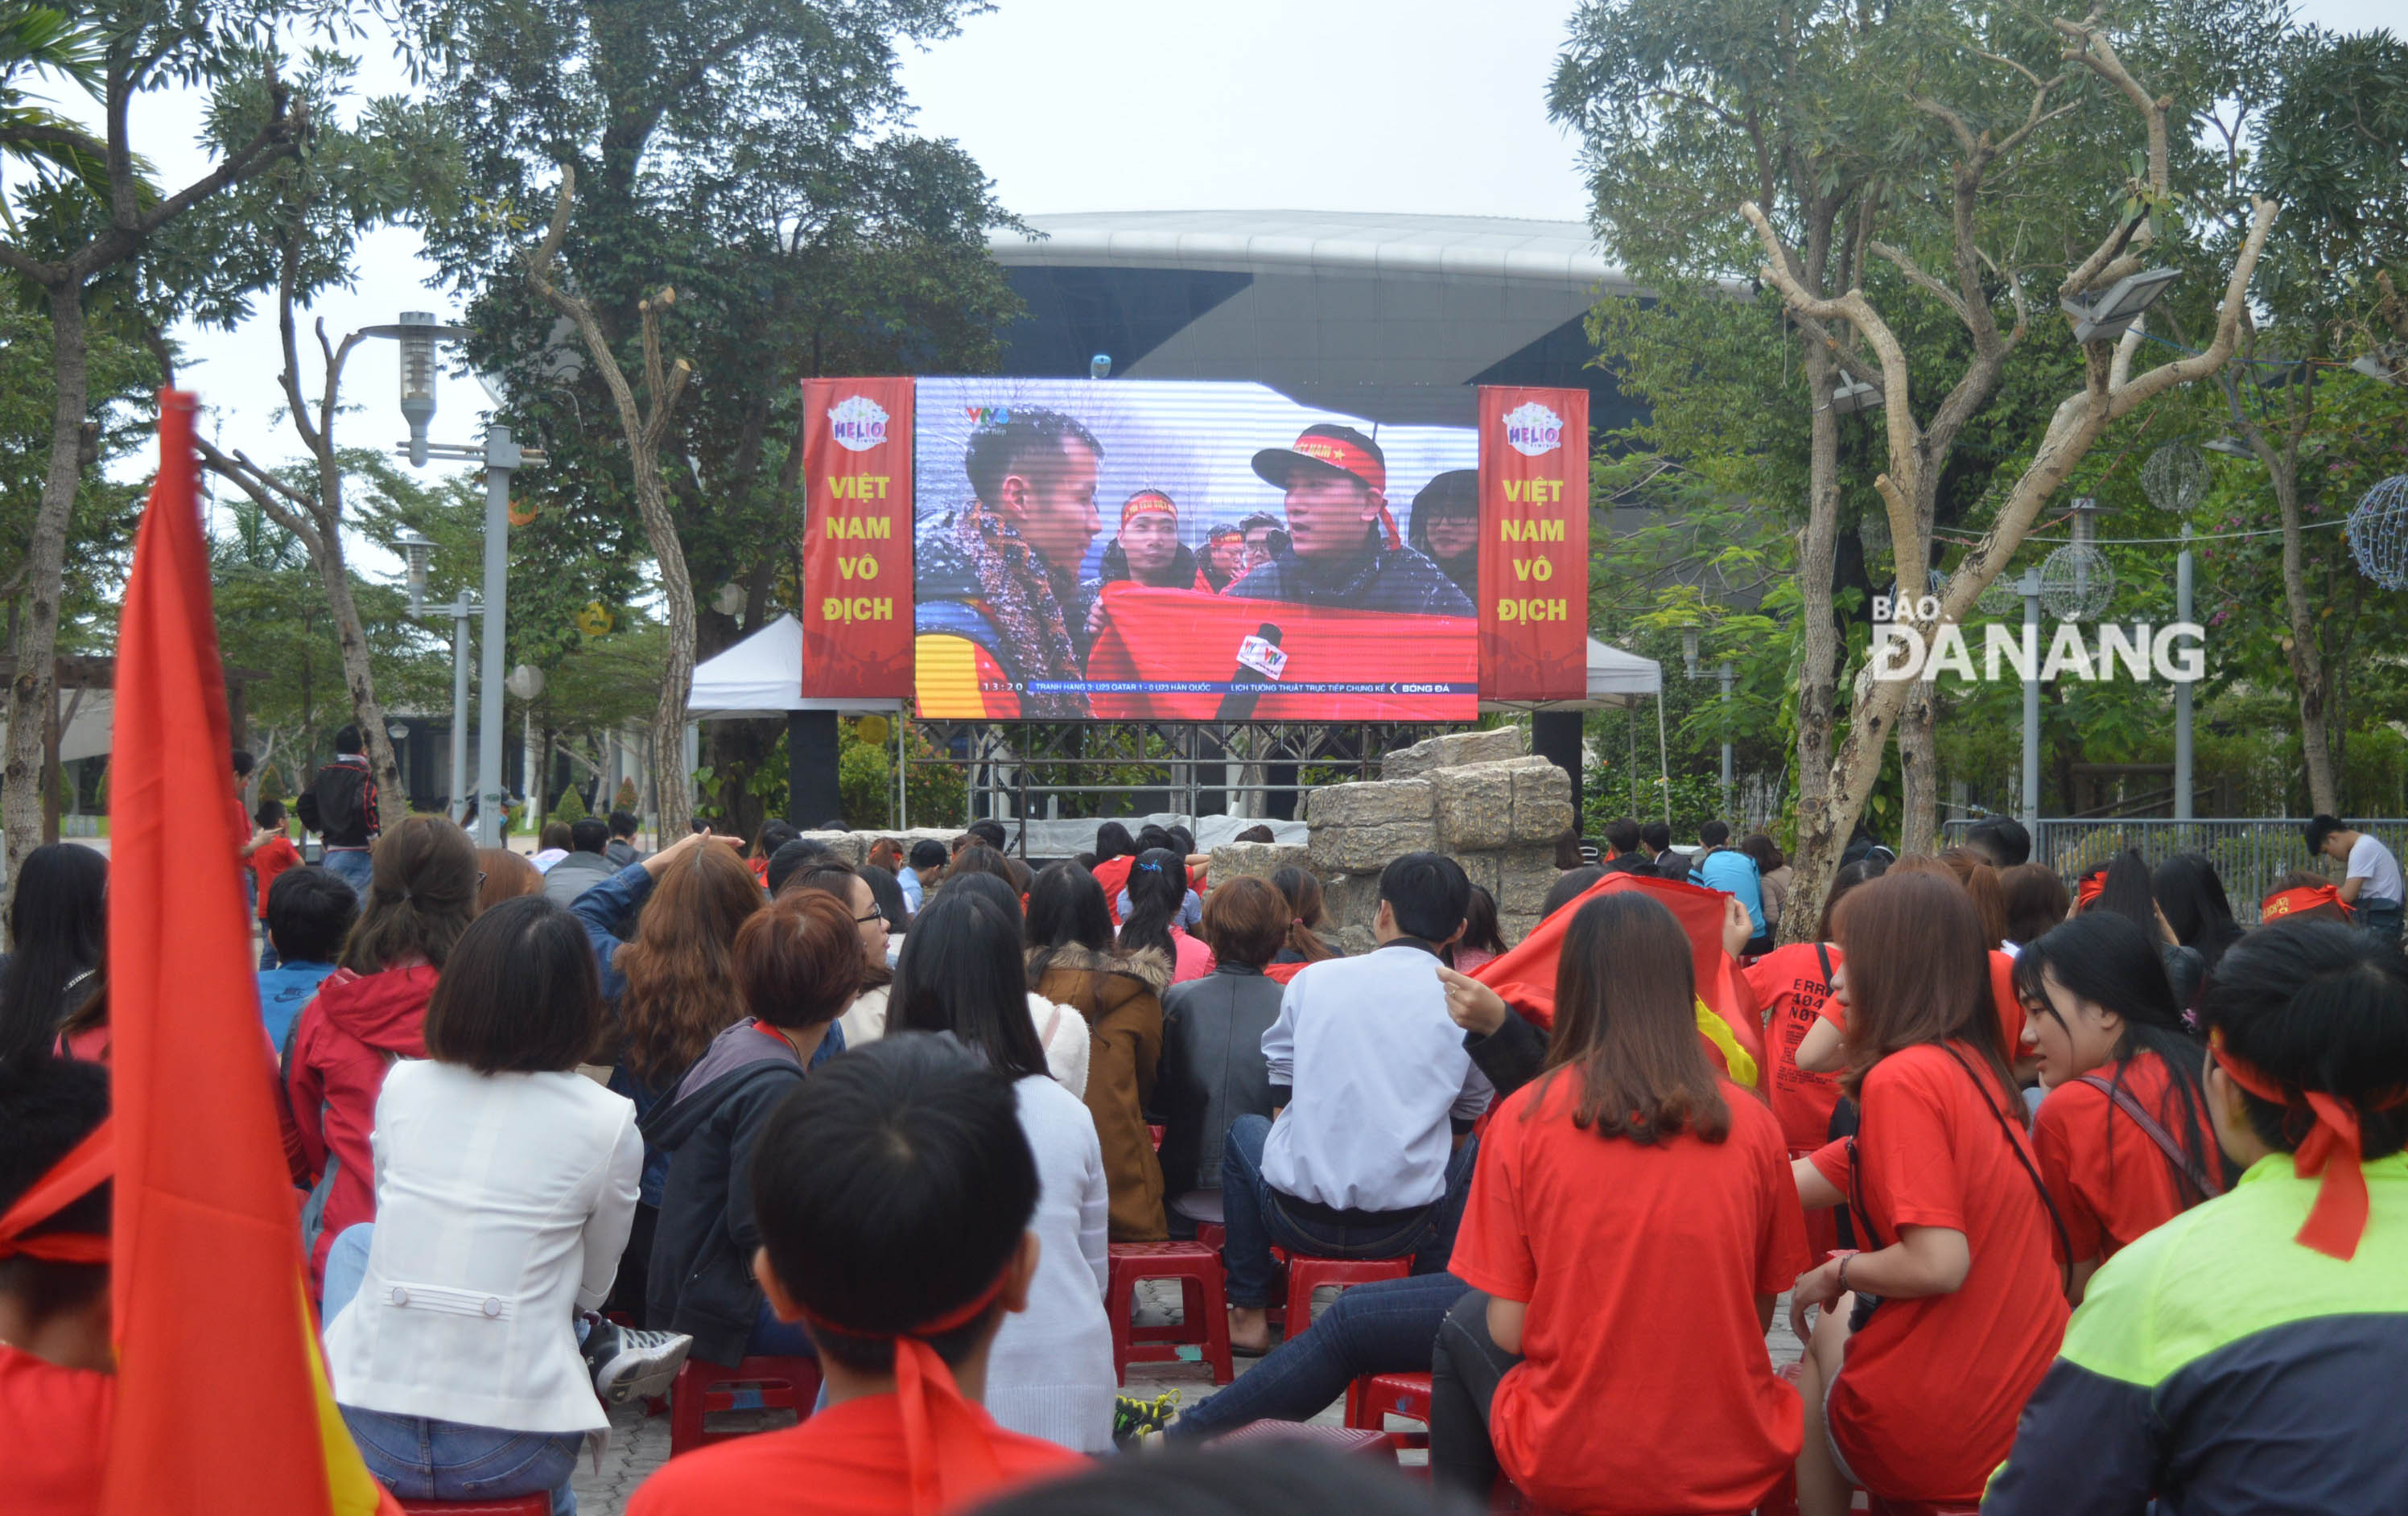  Hundreds watching the AFC U23 final on a big LED screen placed at the Helio Center entertainment complex